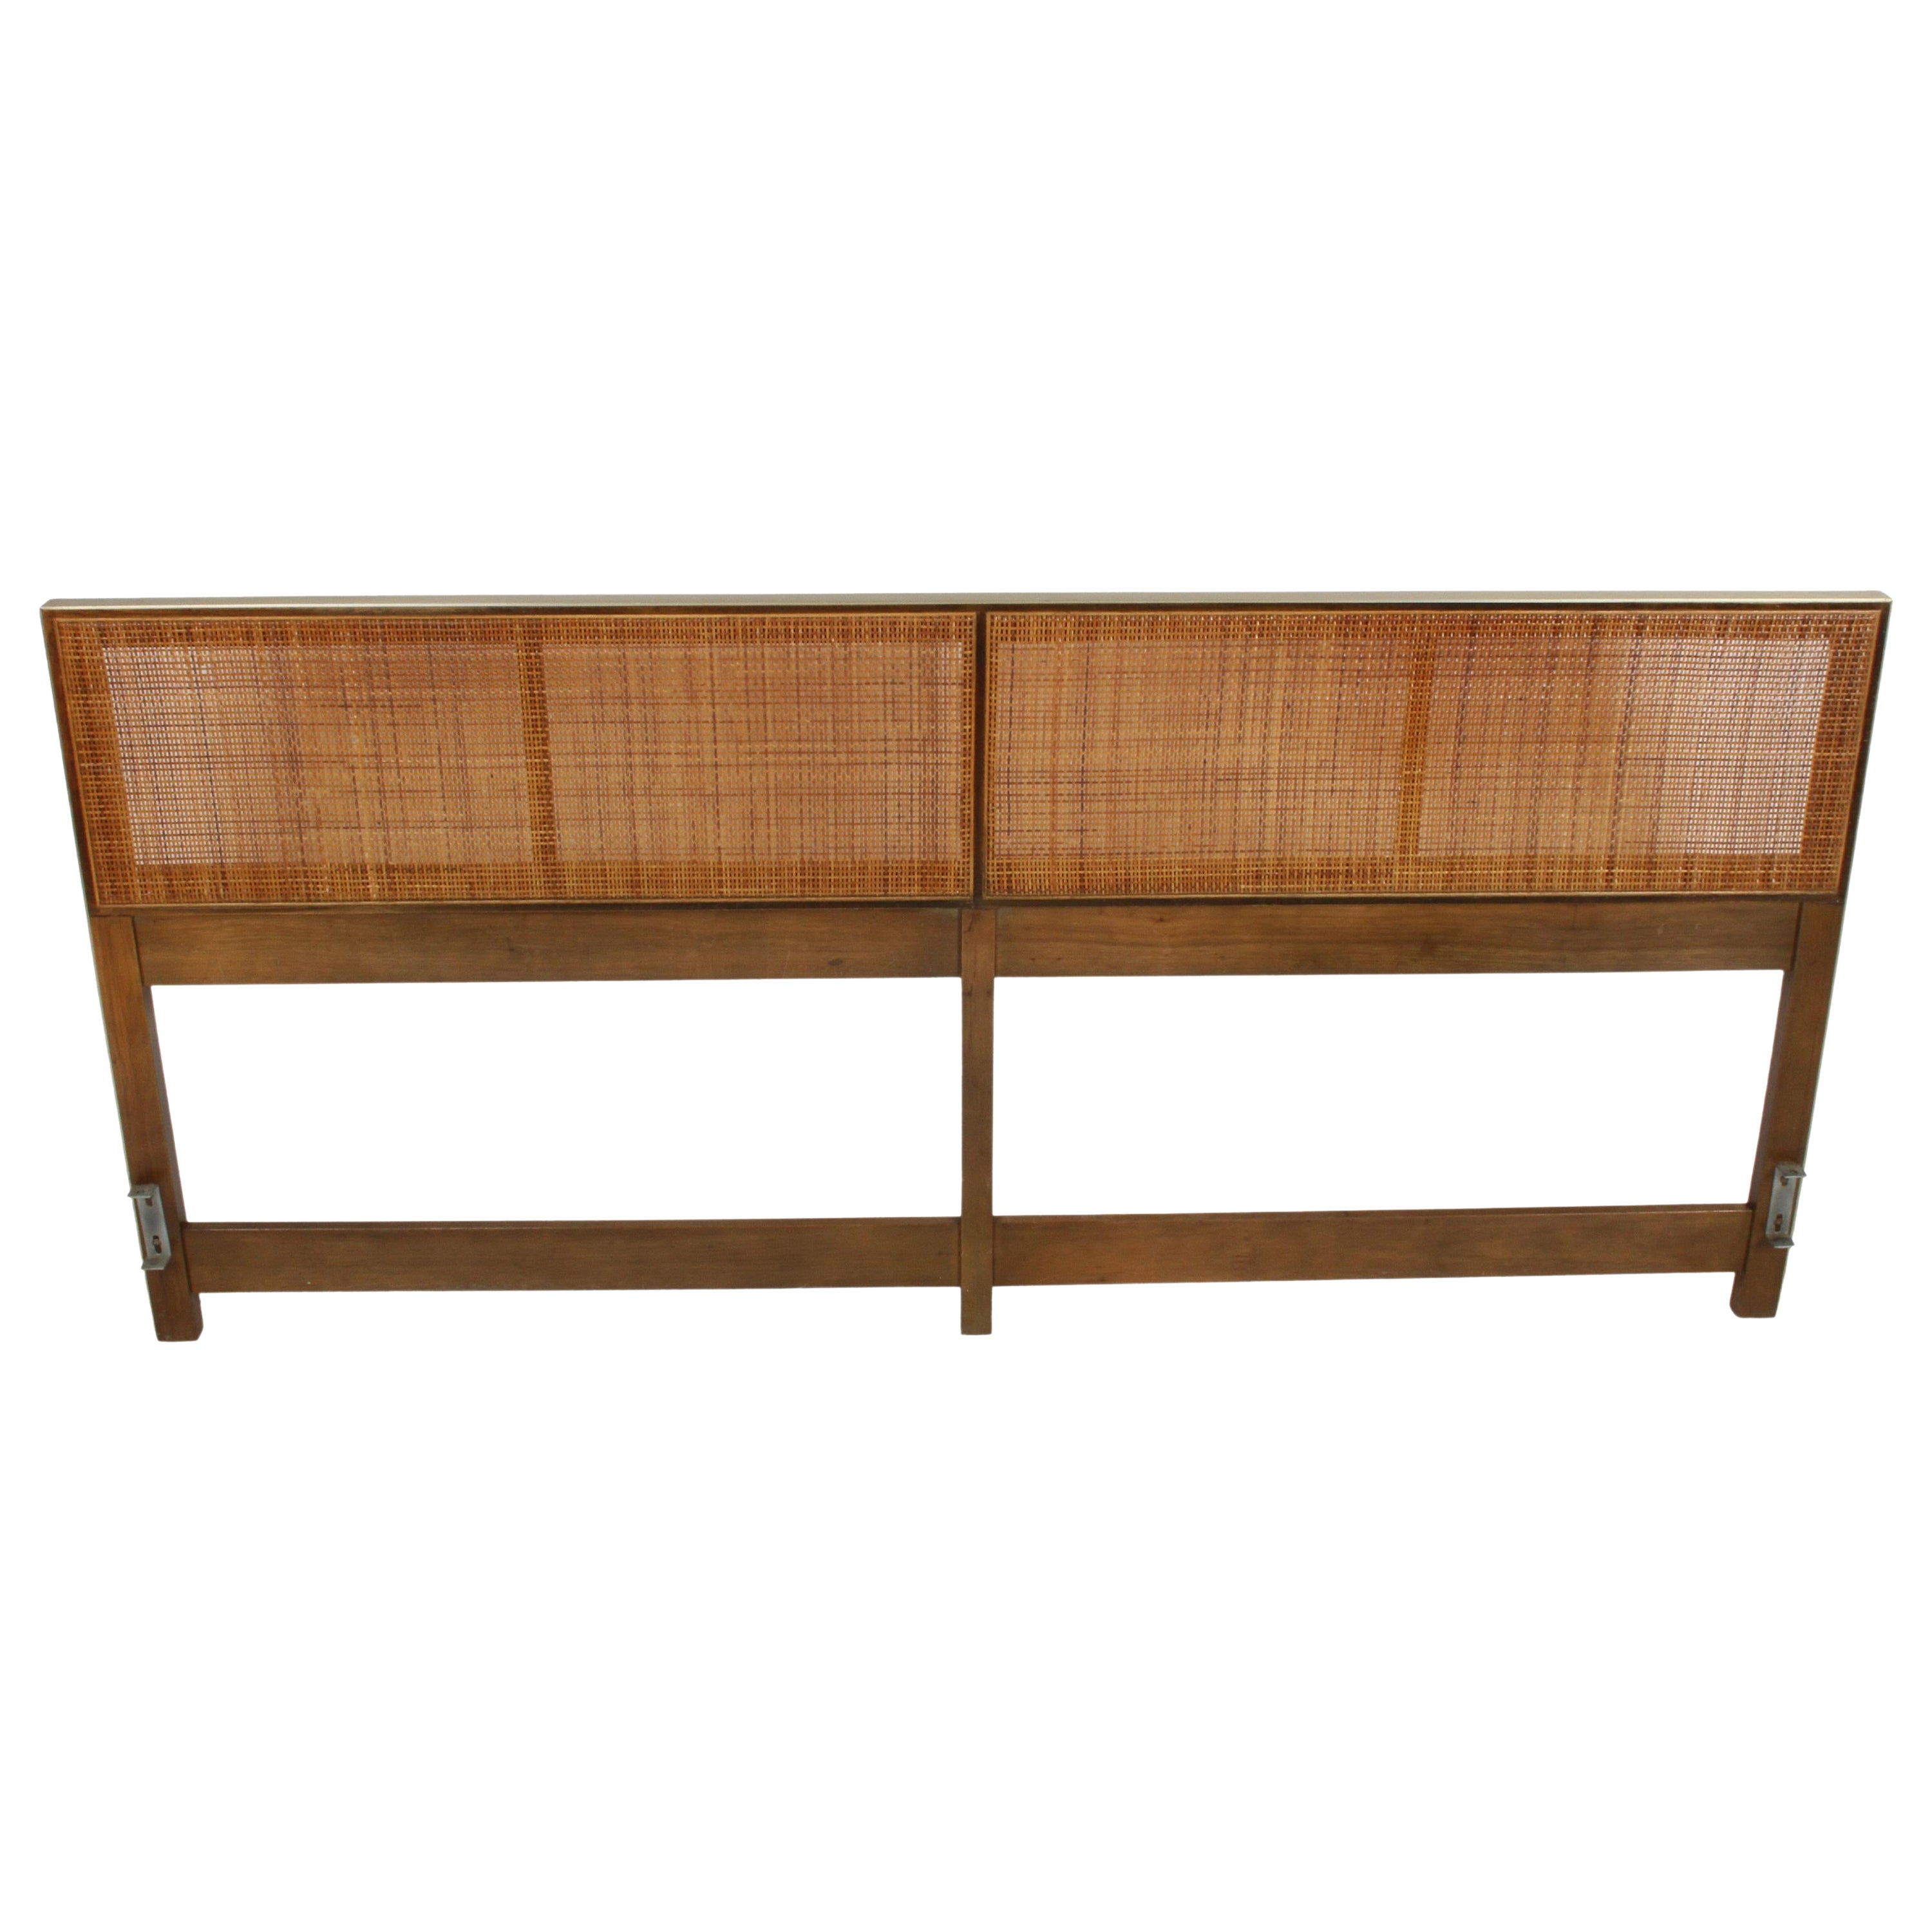 Paul McCobb Mid-Century Modern King Headboard for Calvin with Caned Panels